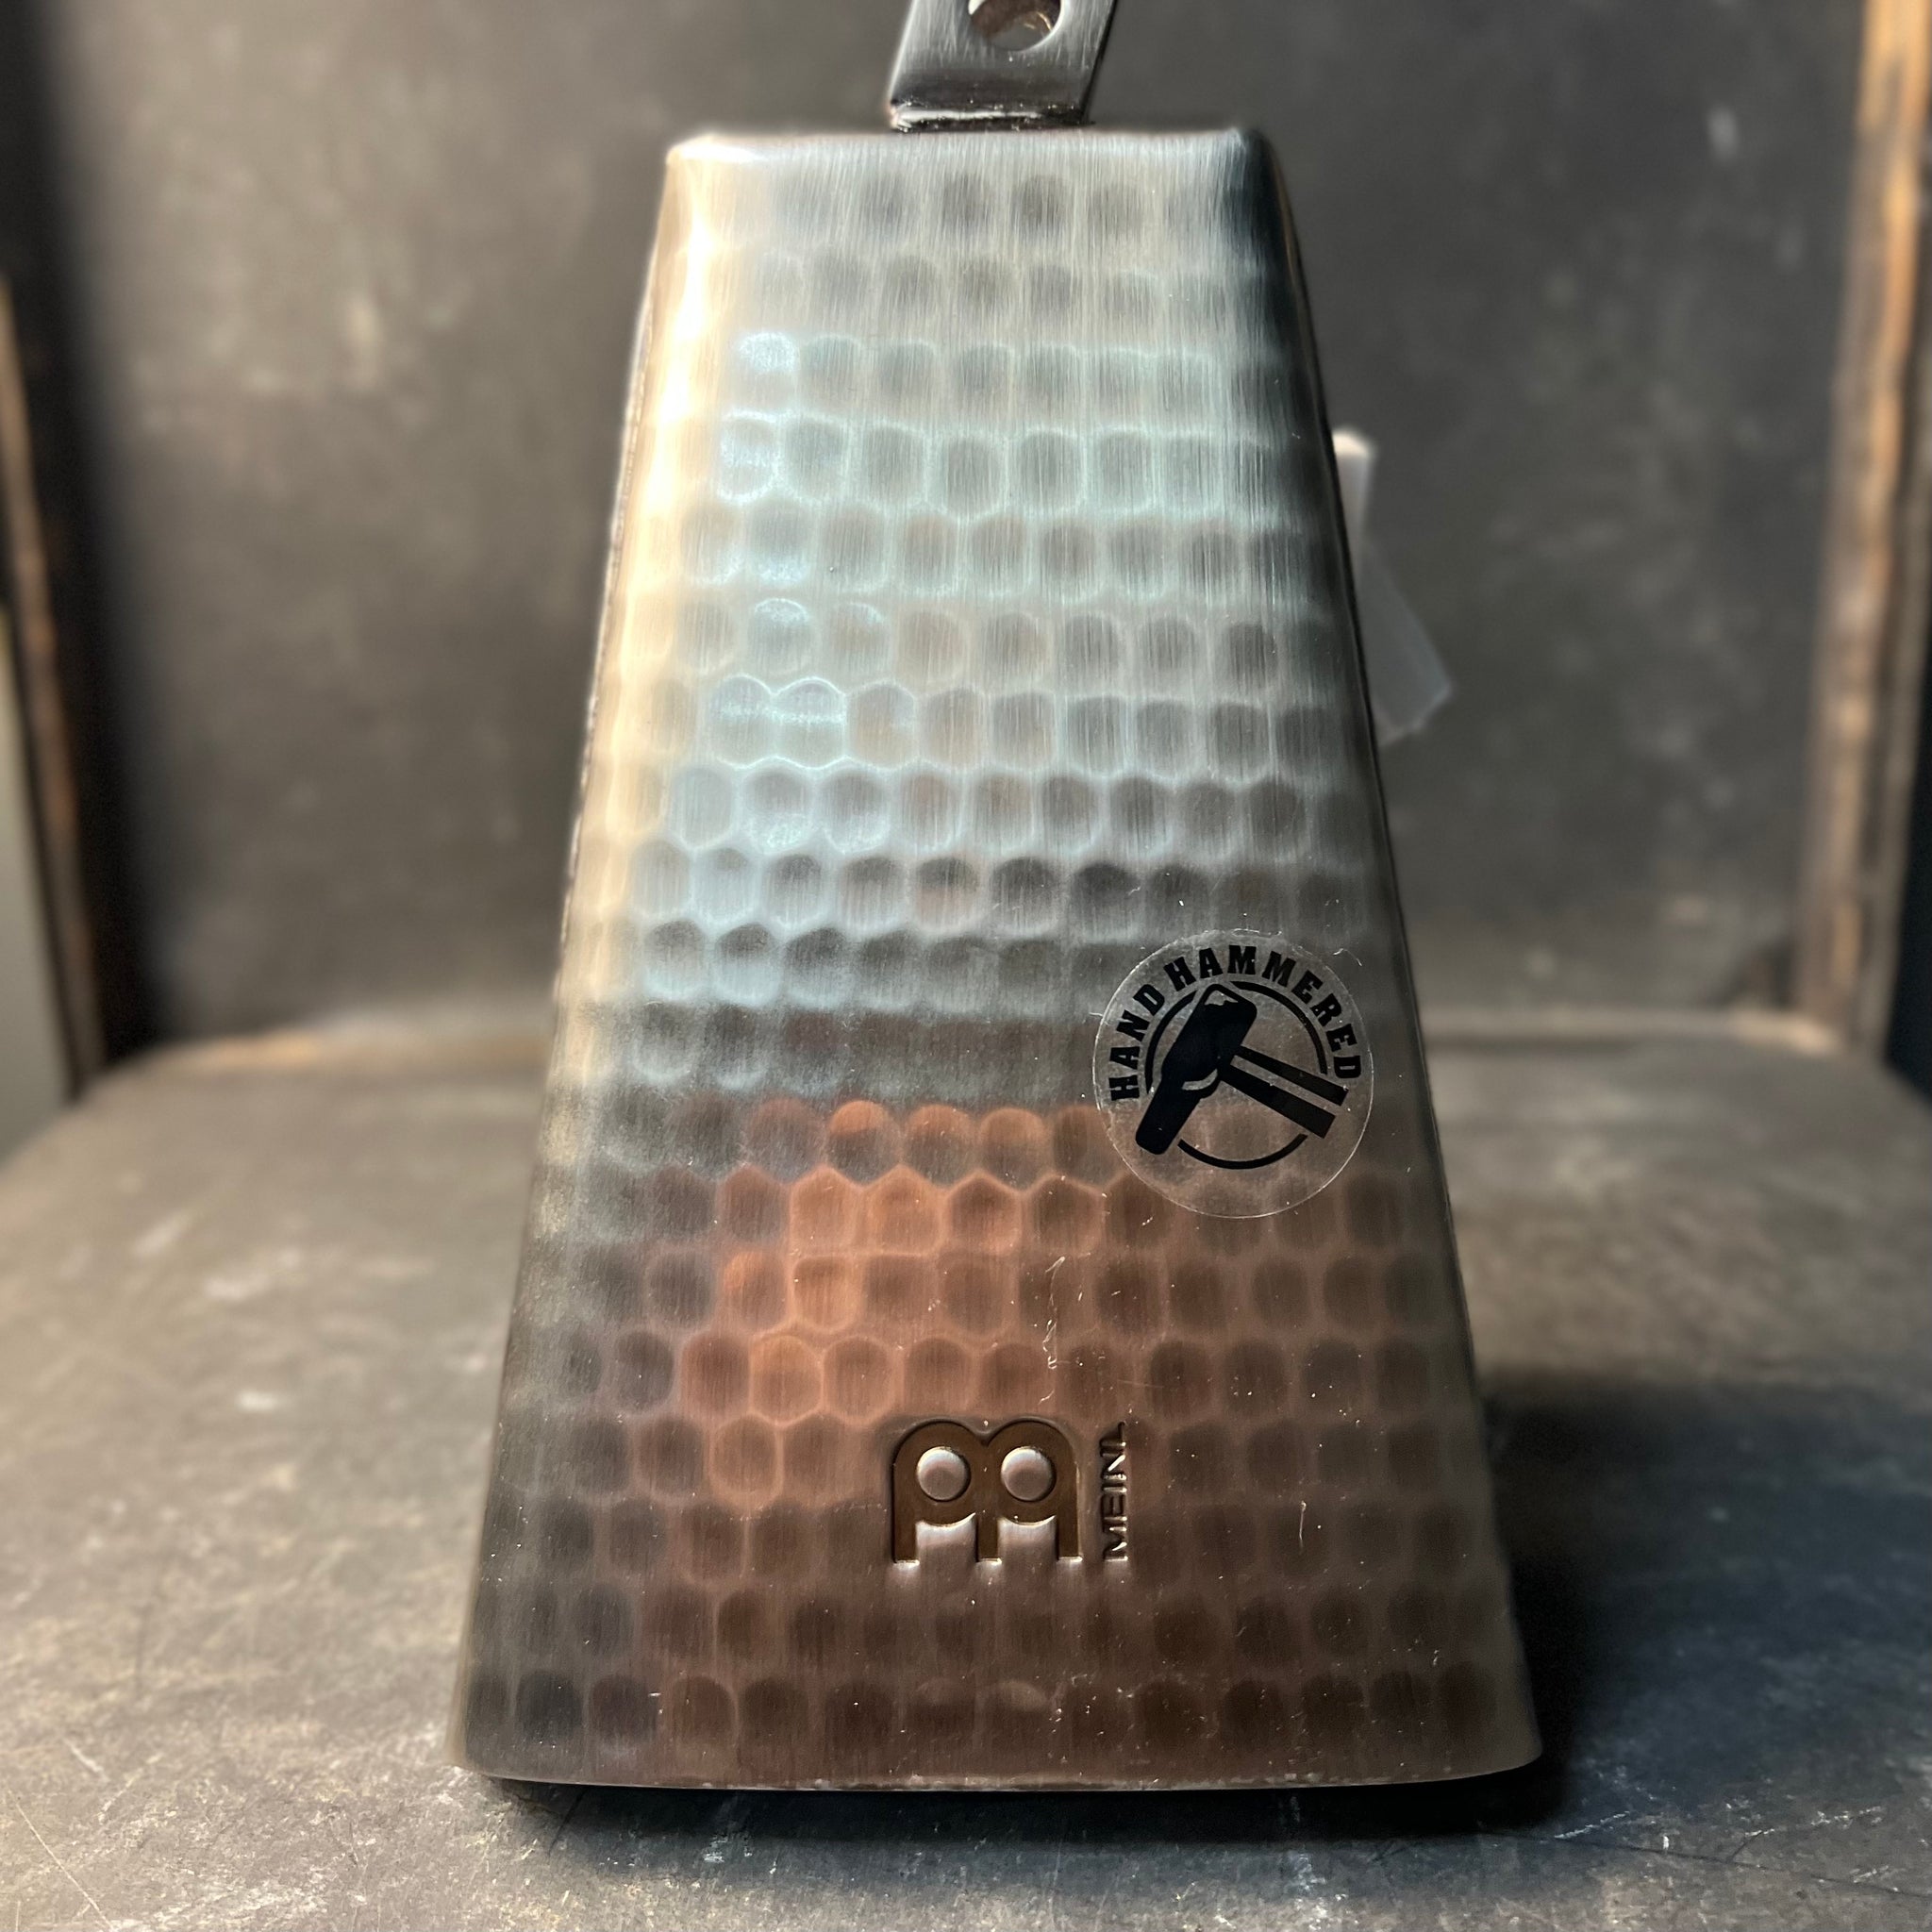 Meinl Hammered Cowbell 8" - Hand Brushed Steel